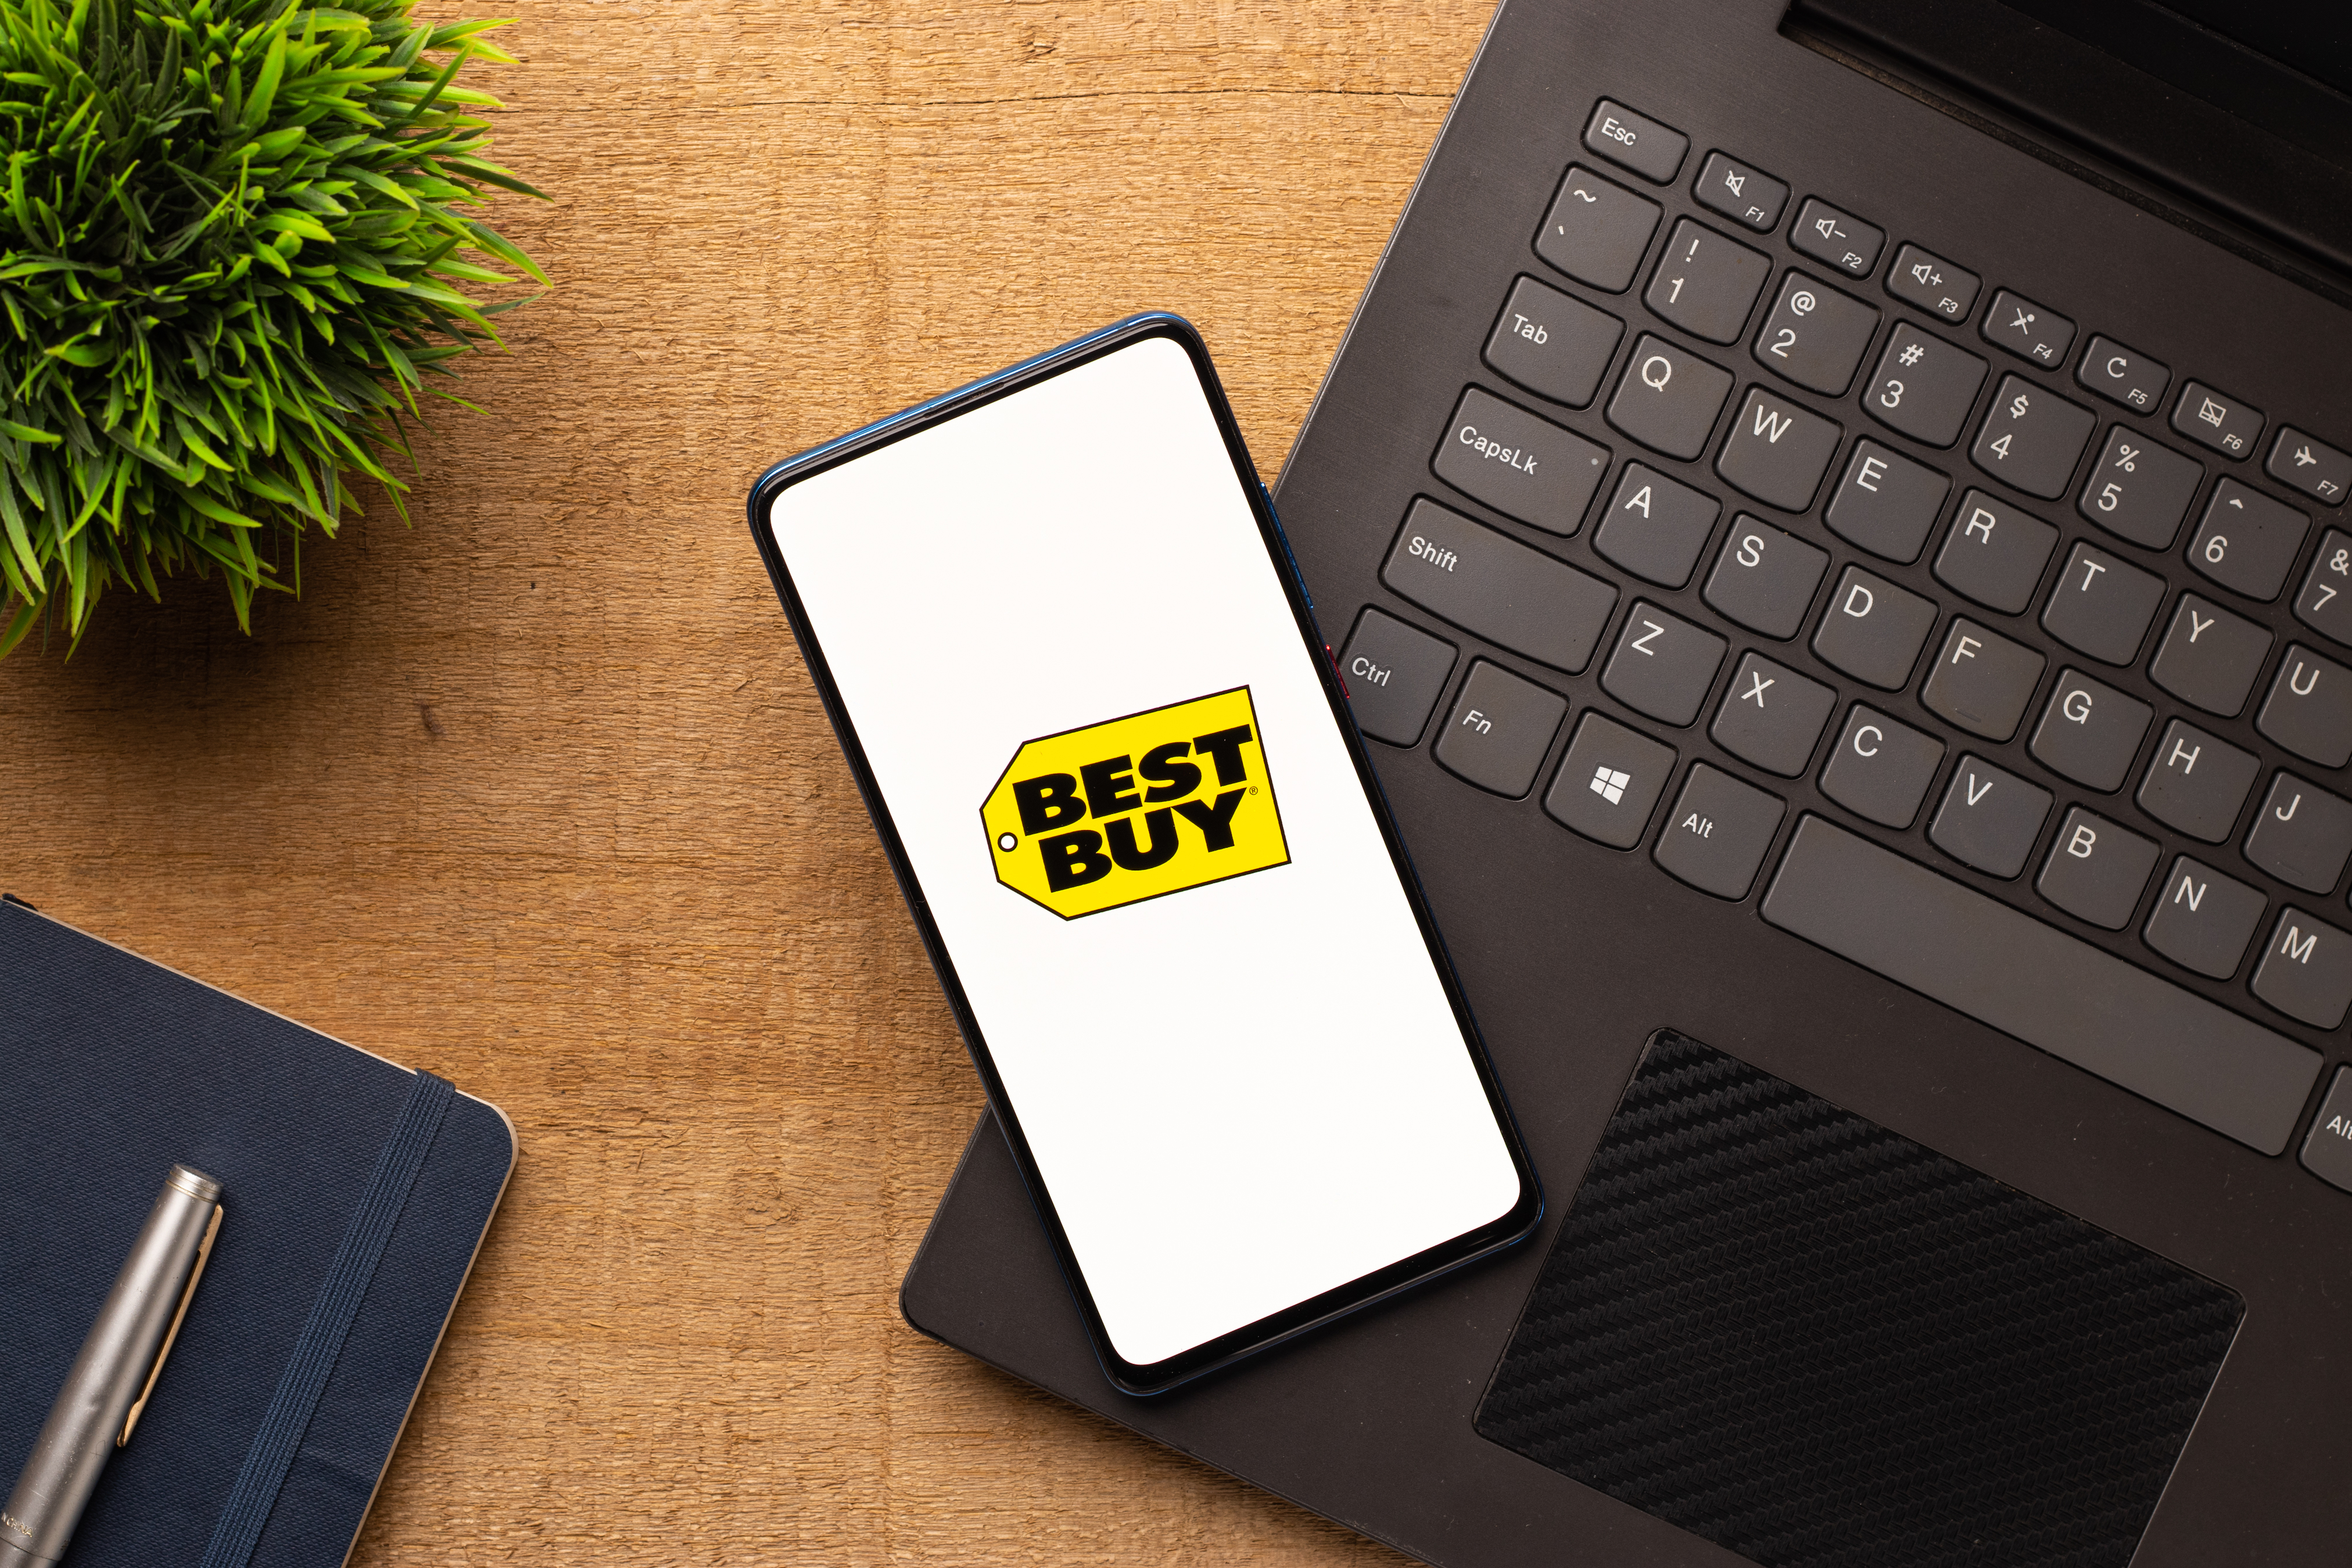 Smartphone showing the Best Buy logo sitting on top of a laptop